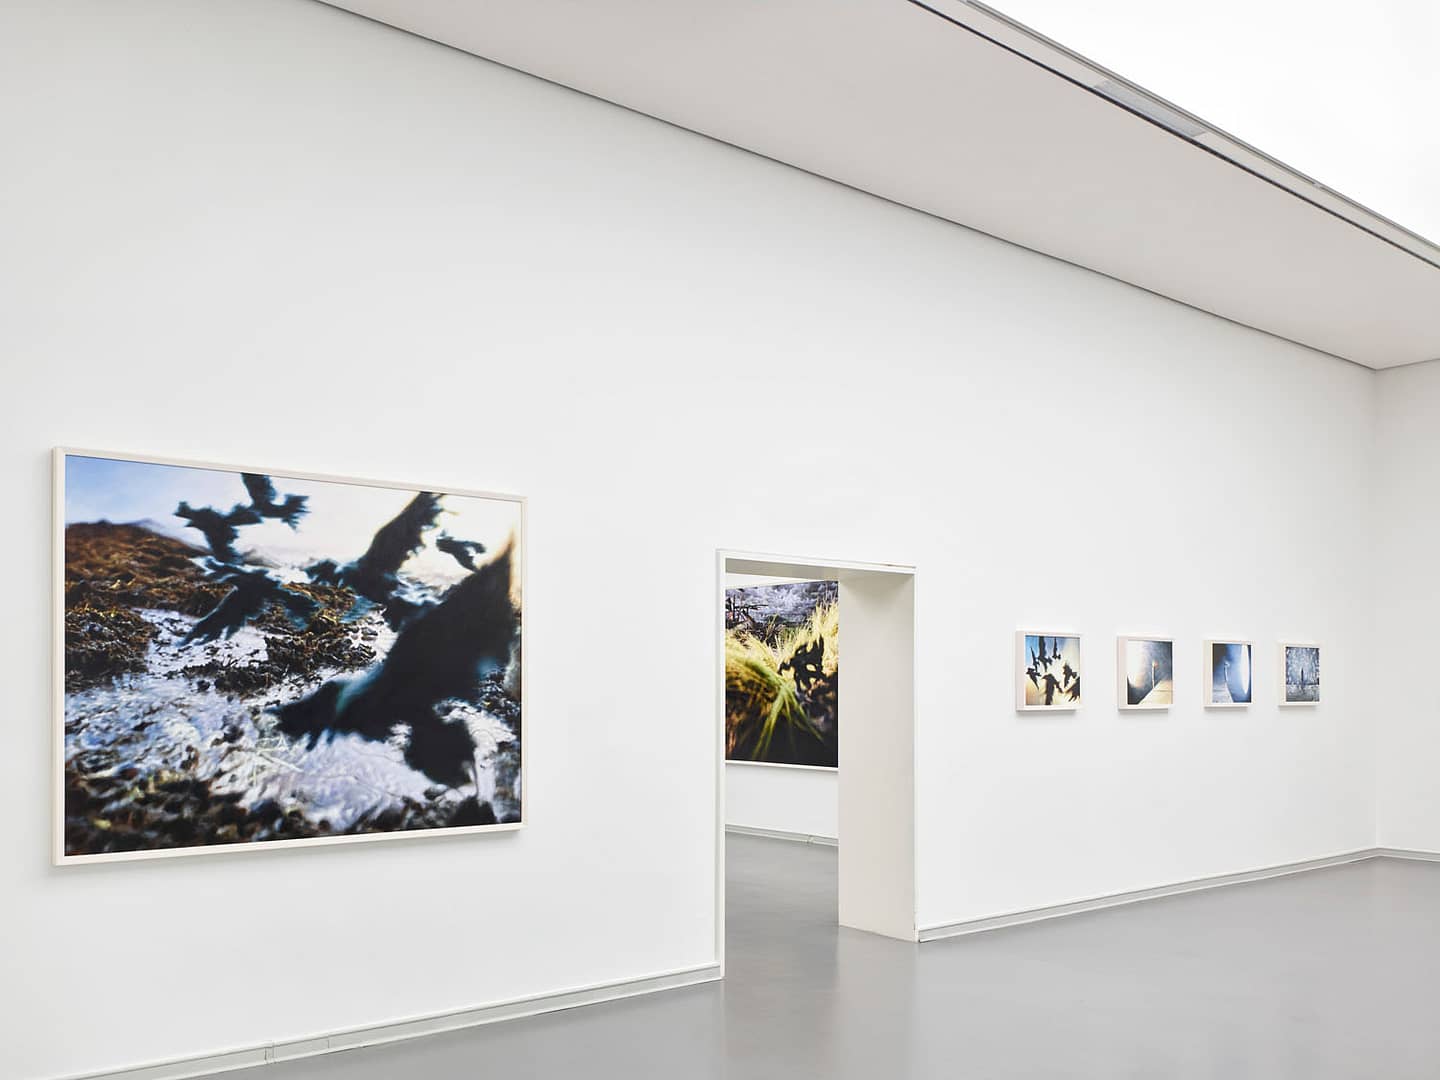 Exhibition view of Philipp Fröhlich's solo show Märchen at Von der Heydt Kunsthalle Barmen, produced by Kunst- und Museumsverein Wuppertal. The image shows various paintings based on popular fairy tales, like the Hobyahs and the seven ravens, hanging at the exhibition.